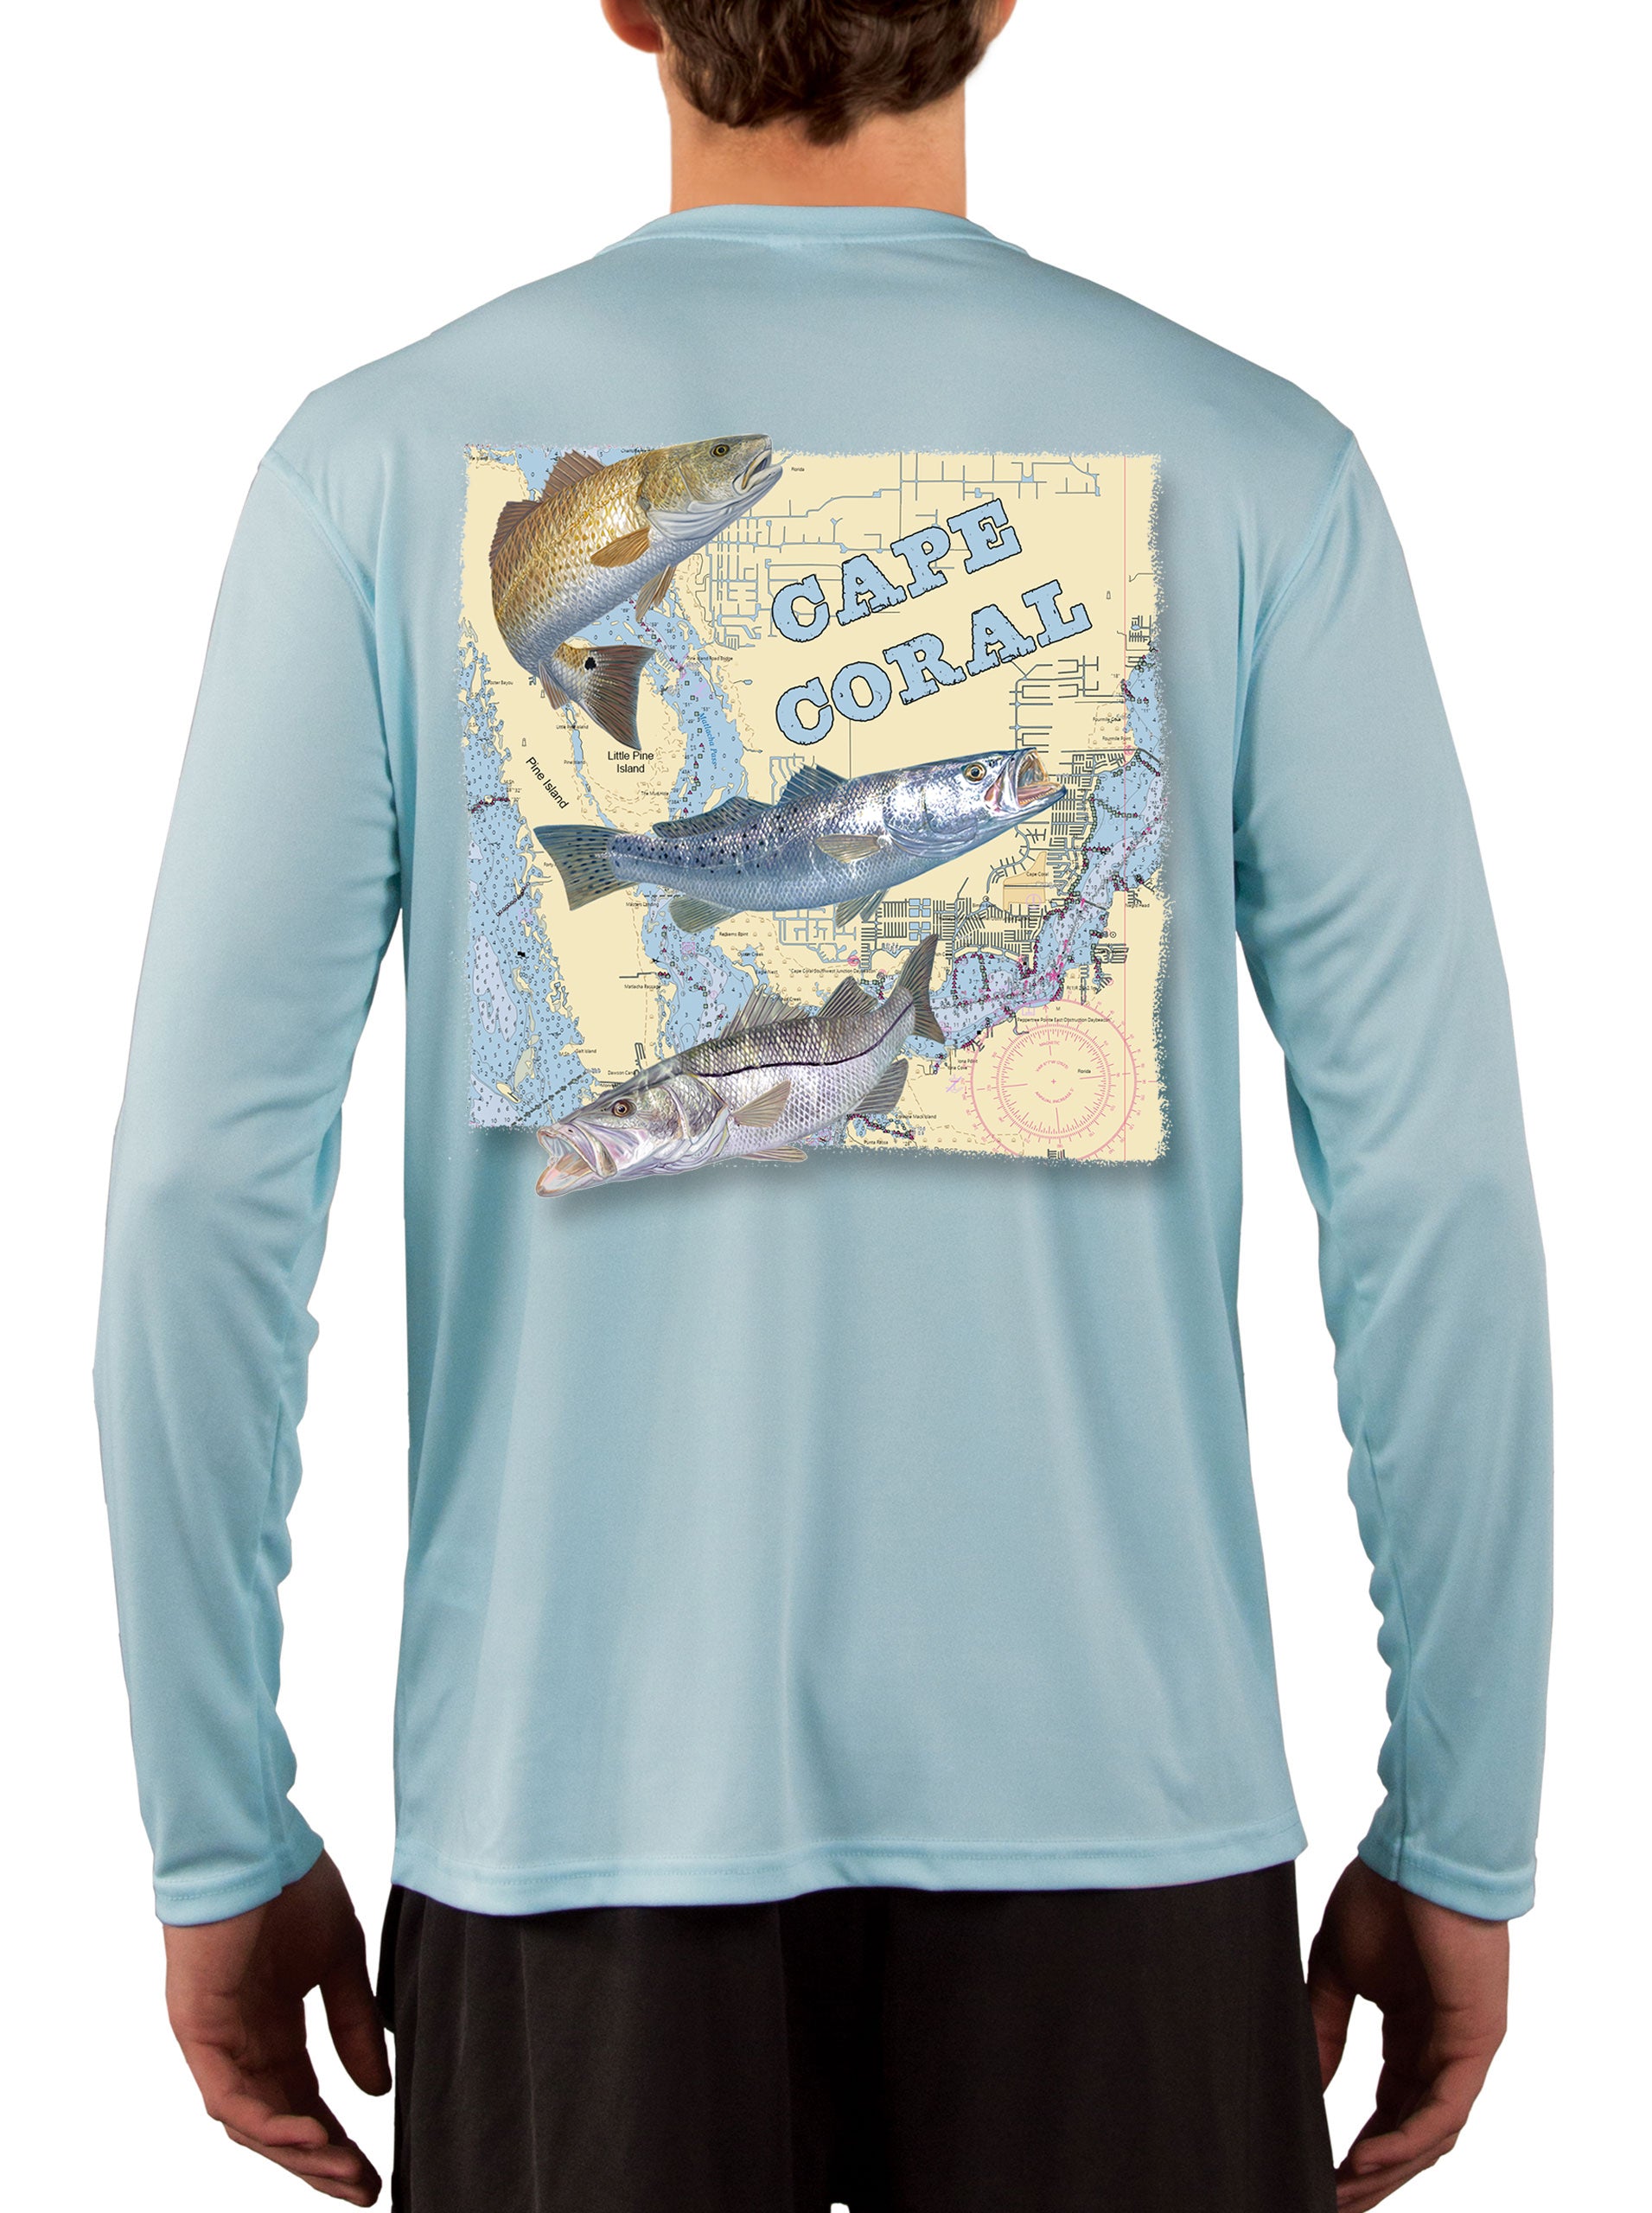 Cape Coral Florida Fishing Shirts For Men Redfish Speckled Sea Trout Snook  Red Drum Seatrout